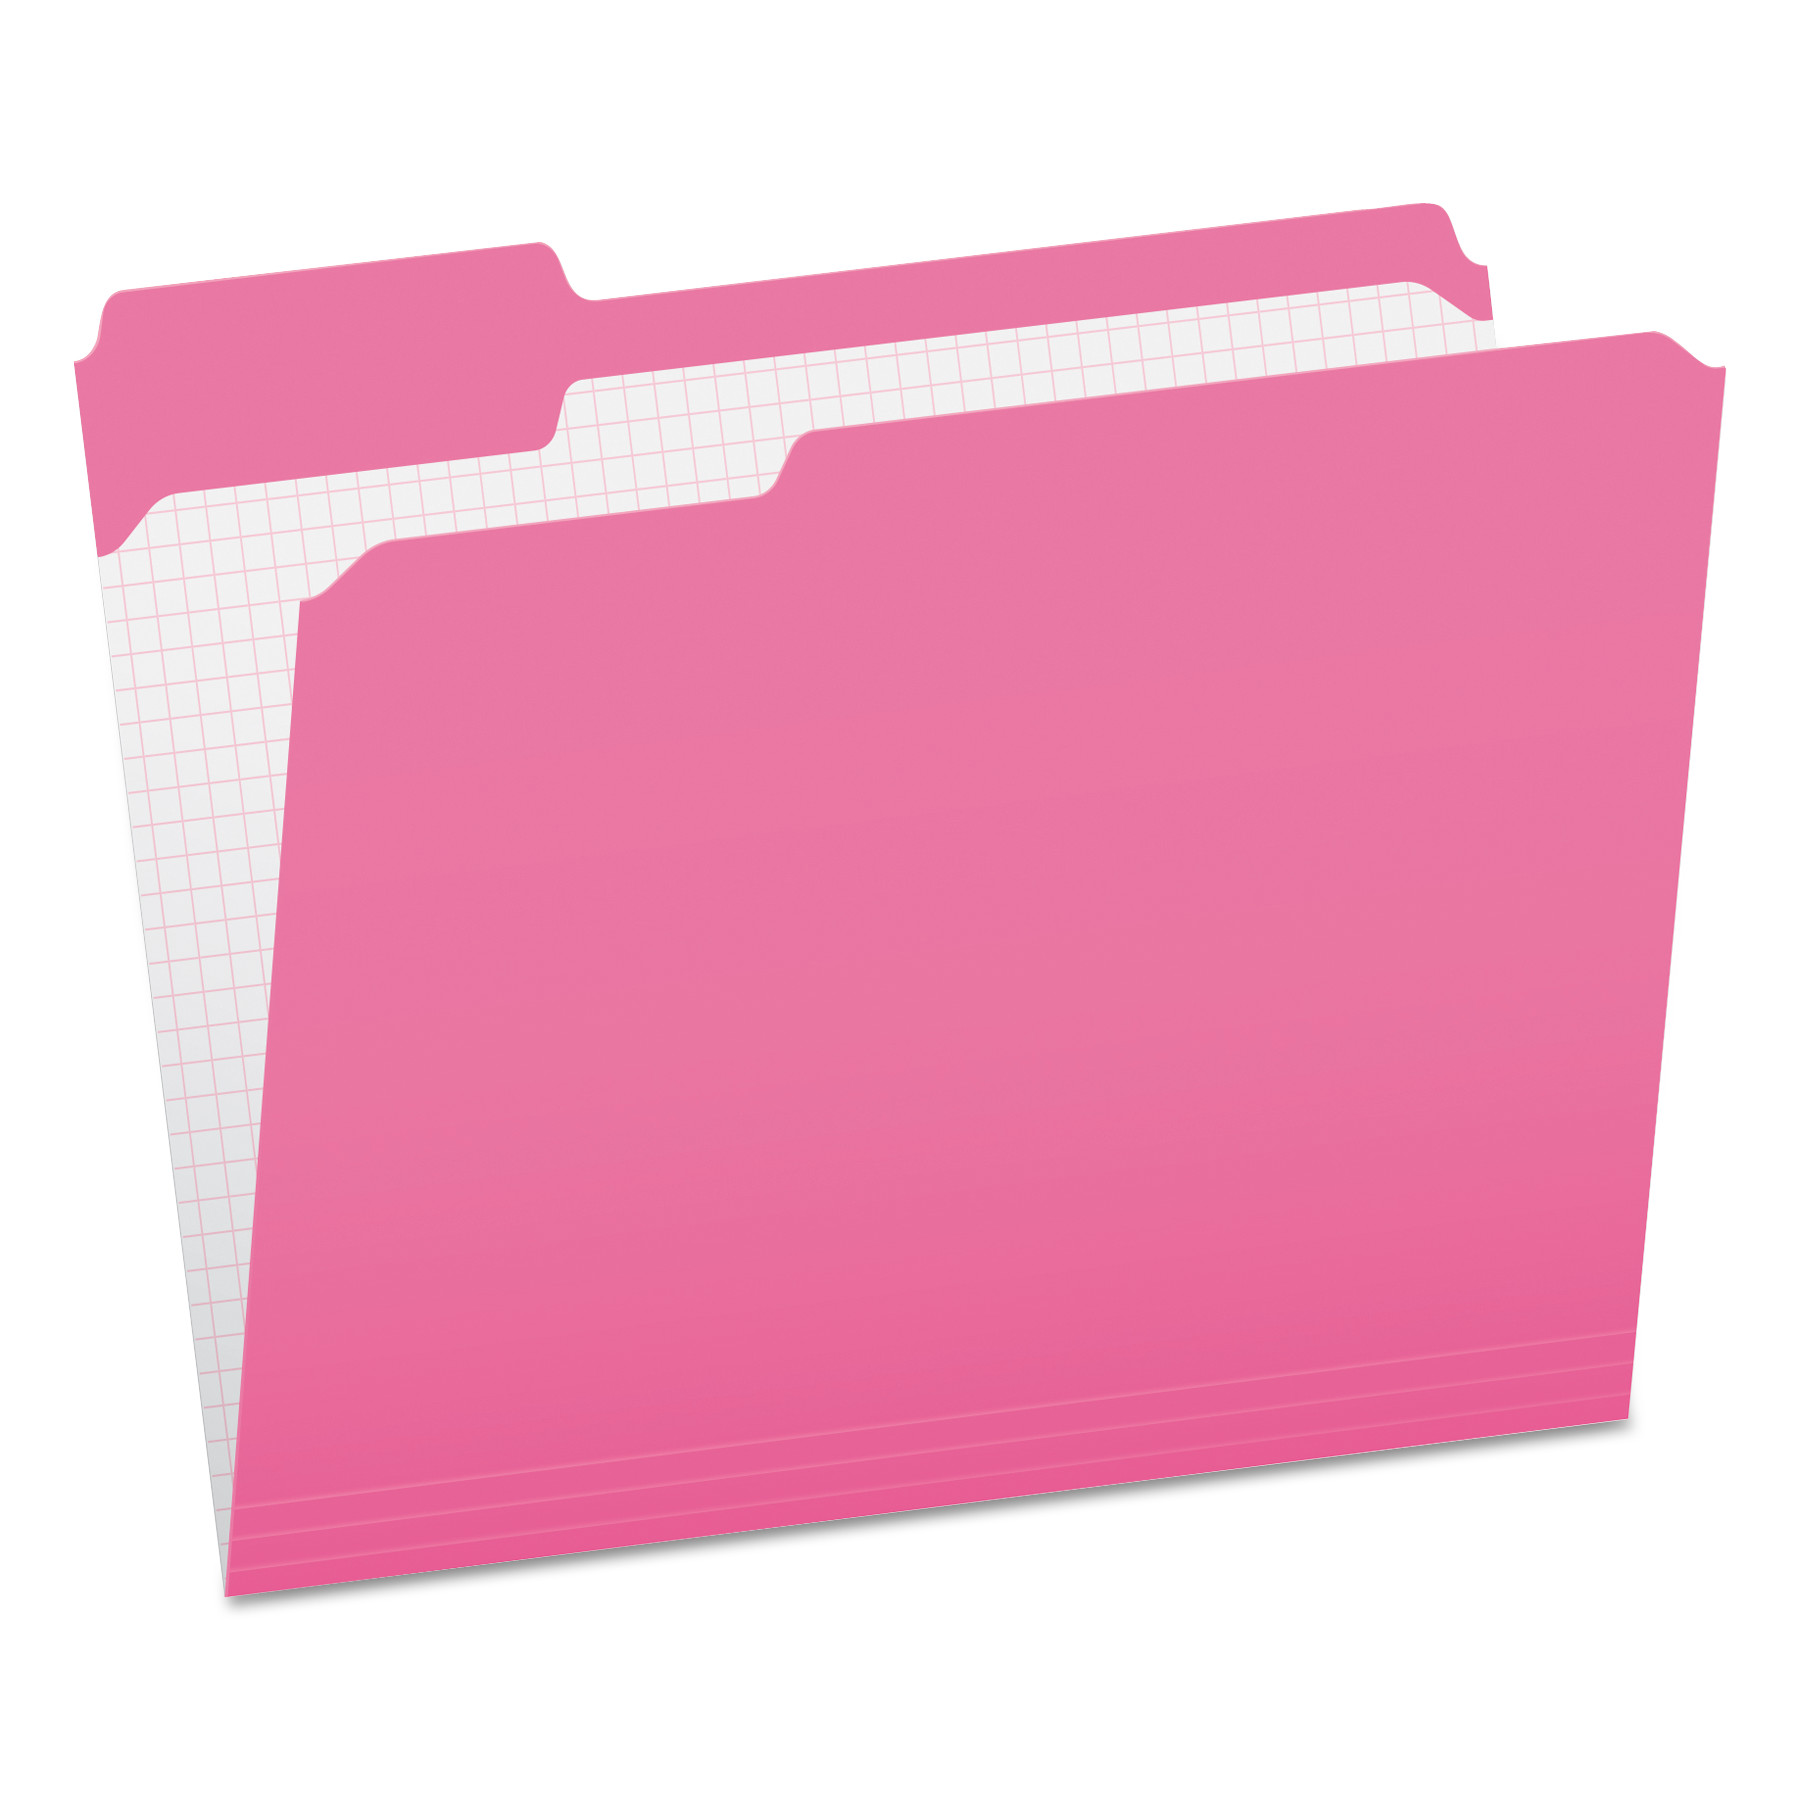  Pendaflex R152 1/3 PIN Double-Ply Reinforced Top Tab Colored File Folders, 1/3-Cut Tabs, Letter Size, Pink, 100/Box (PFXR15213PIN) 